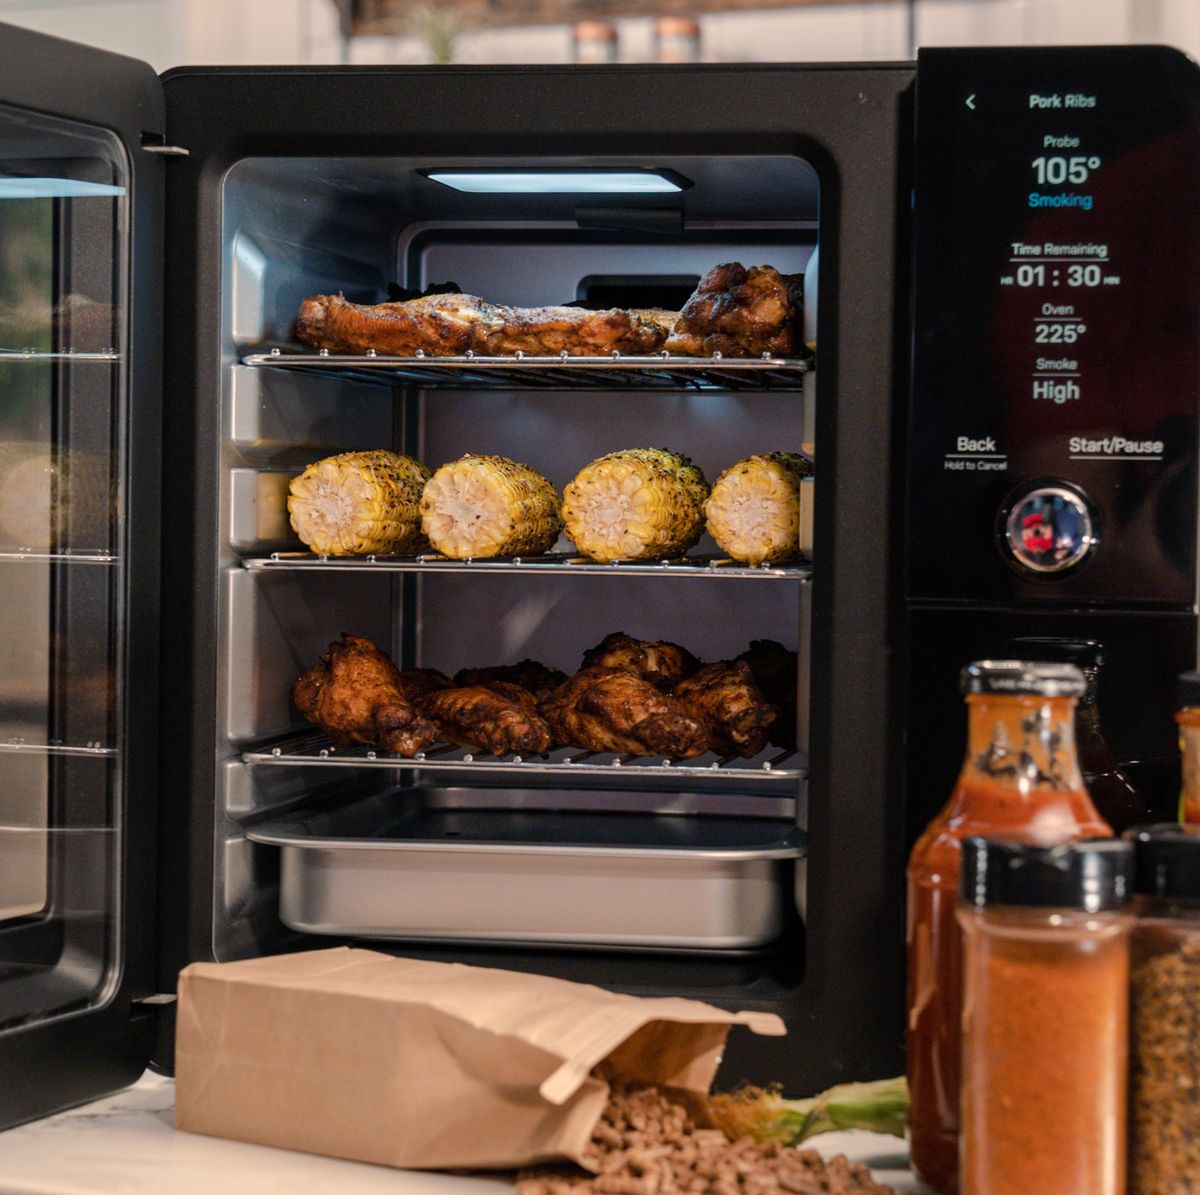 Arden brings BBQ indoors thanks to 'smoke elimination' technology